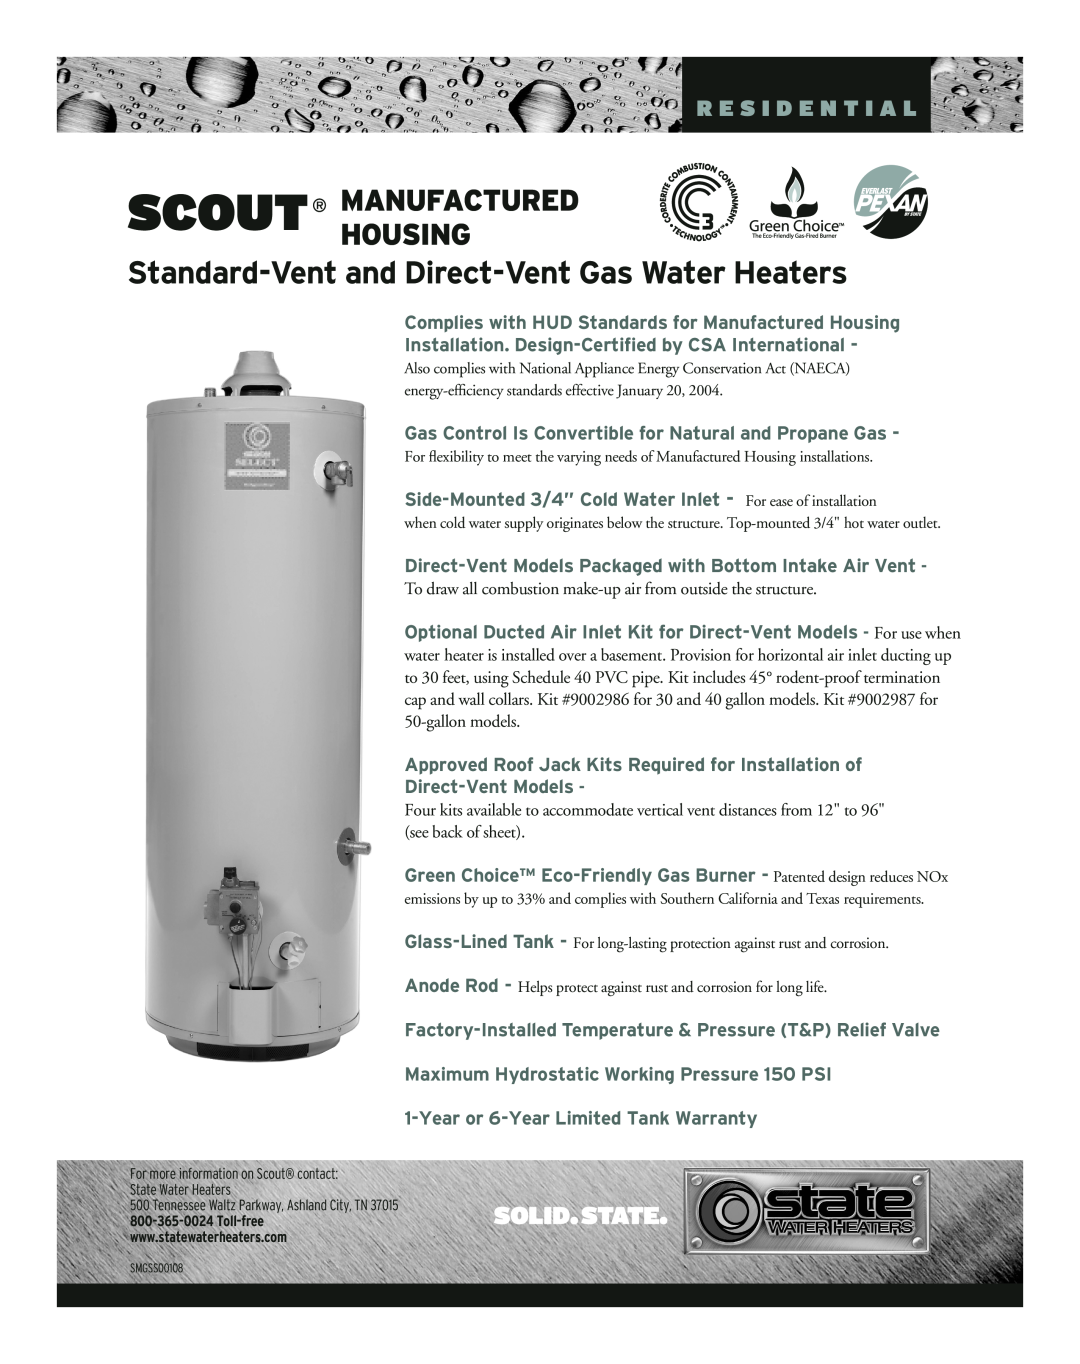 State Industries SMGSS00108 warranty Standard-Vent and Direct-Vent Gas Water Heaters, Scout Manufacturedhousing 